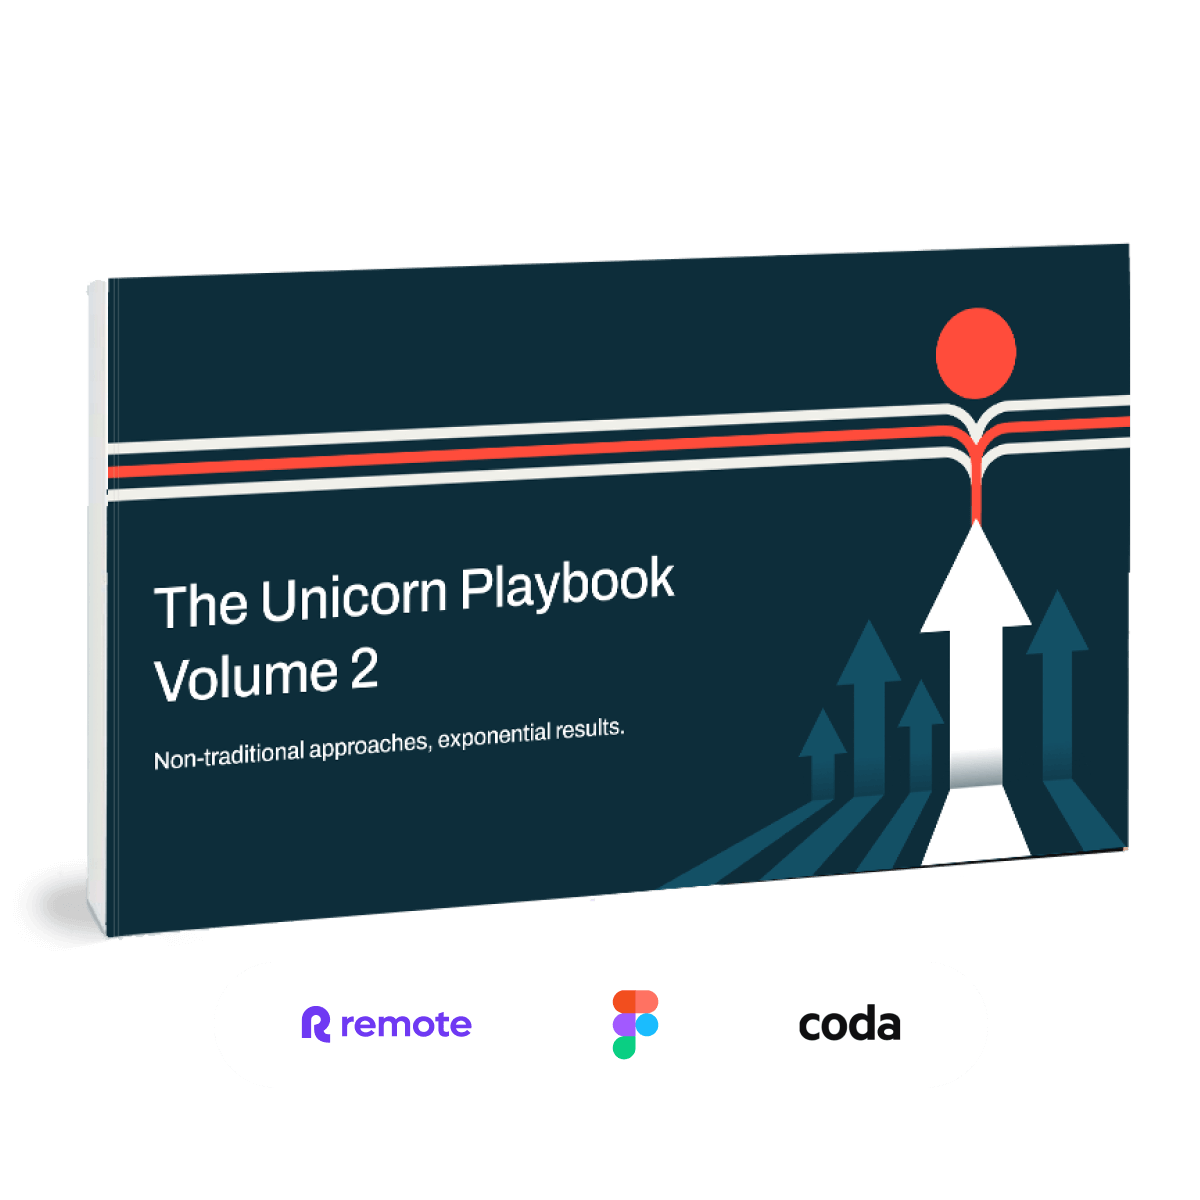 Cover of the Unicorn Playbook Volume 2